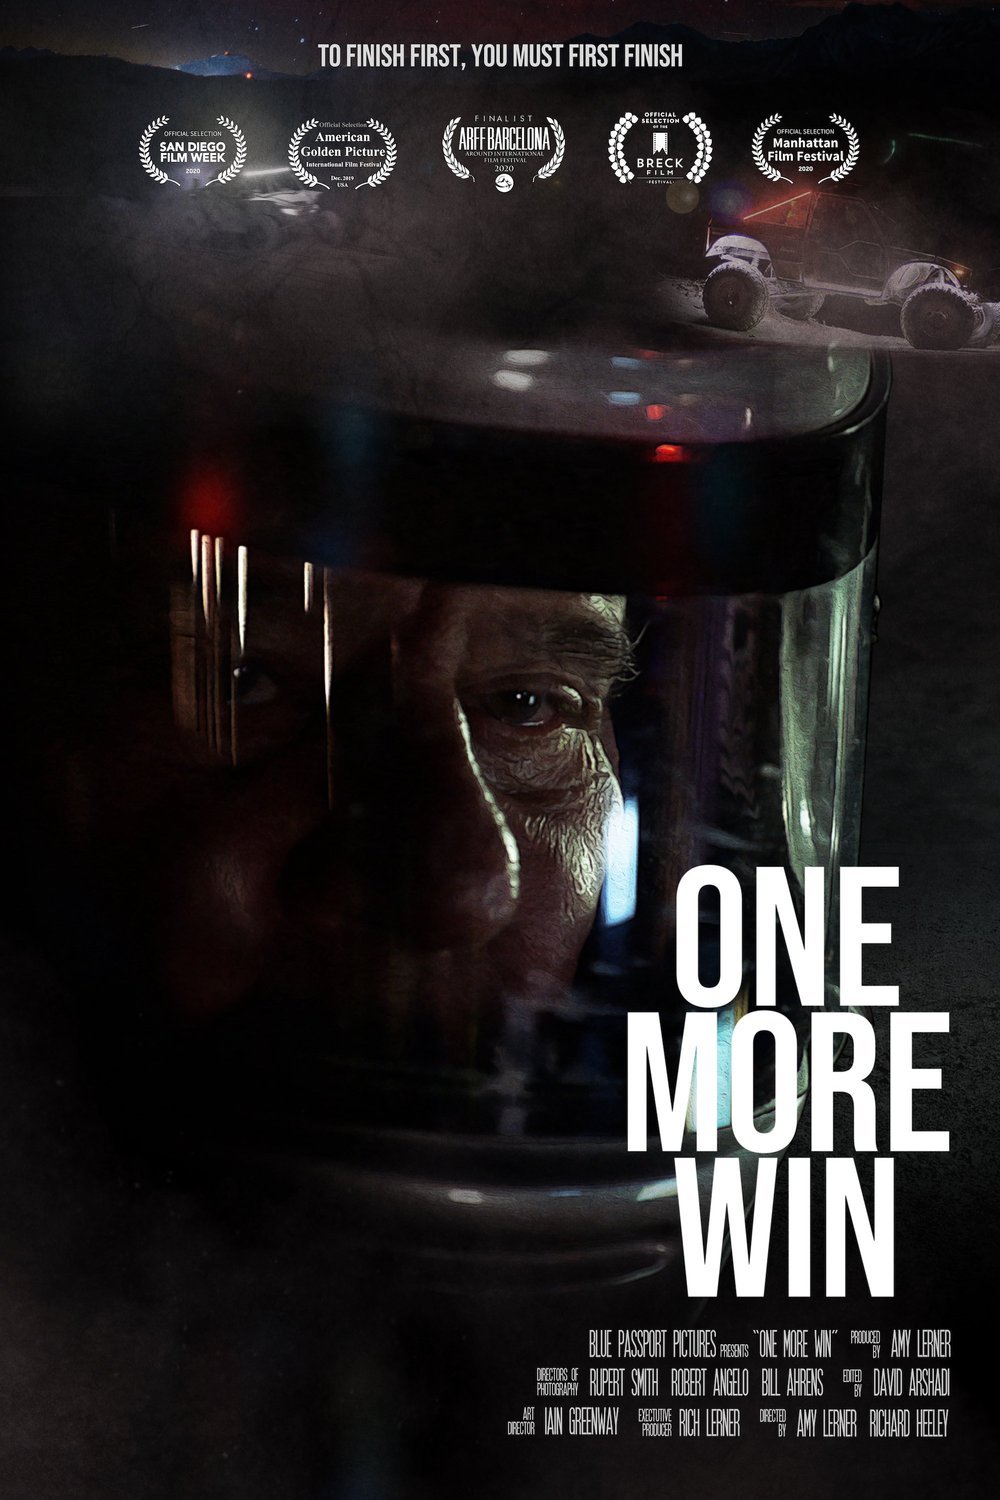 Poster of the movie One More Win